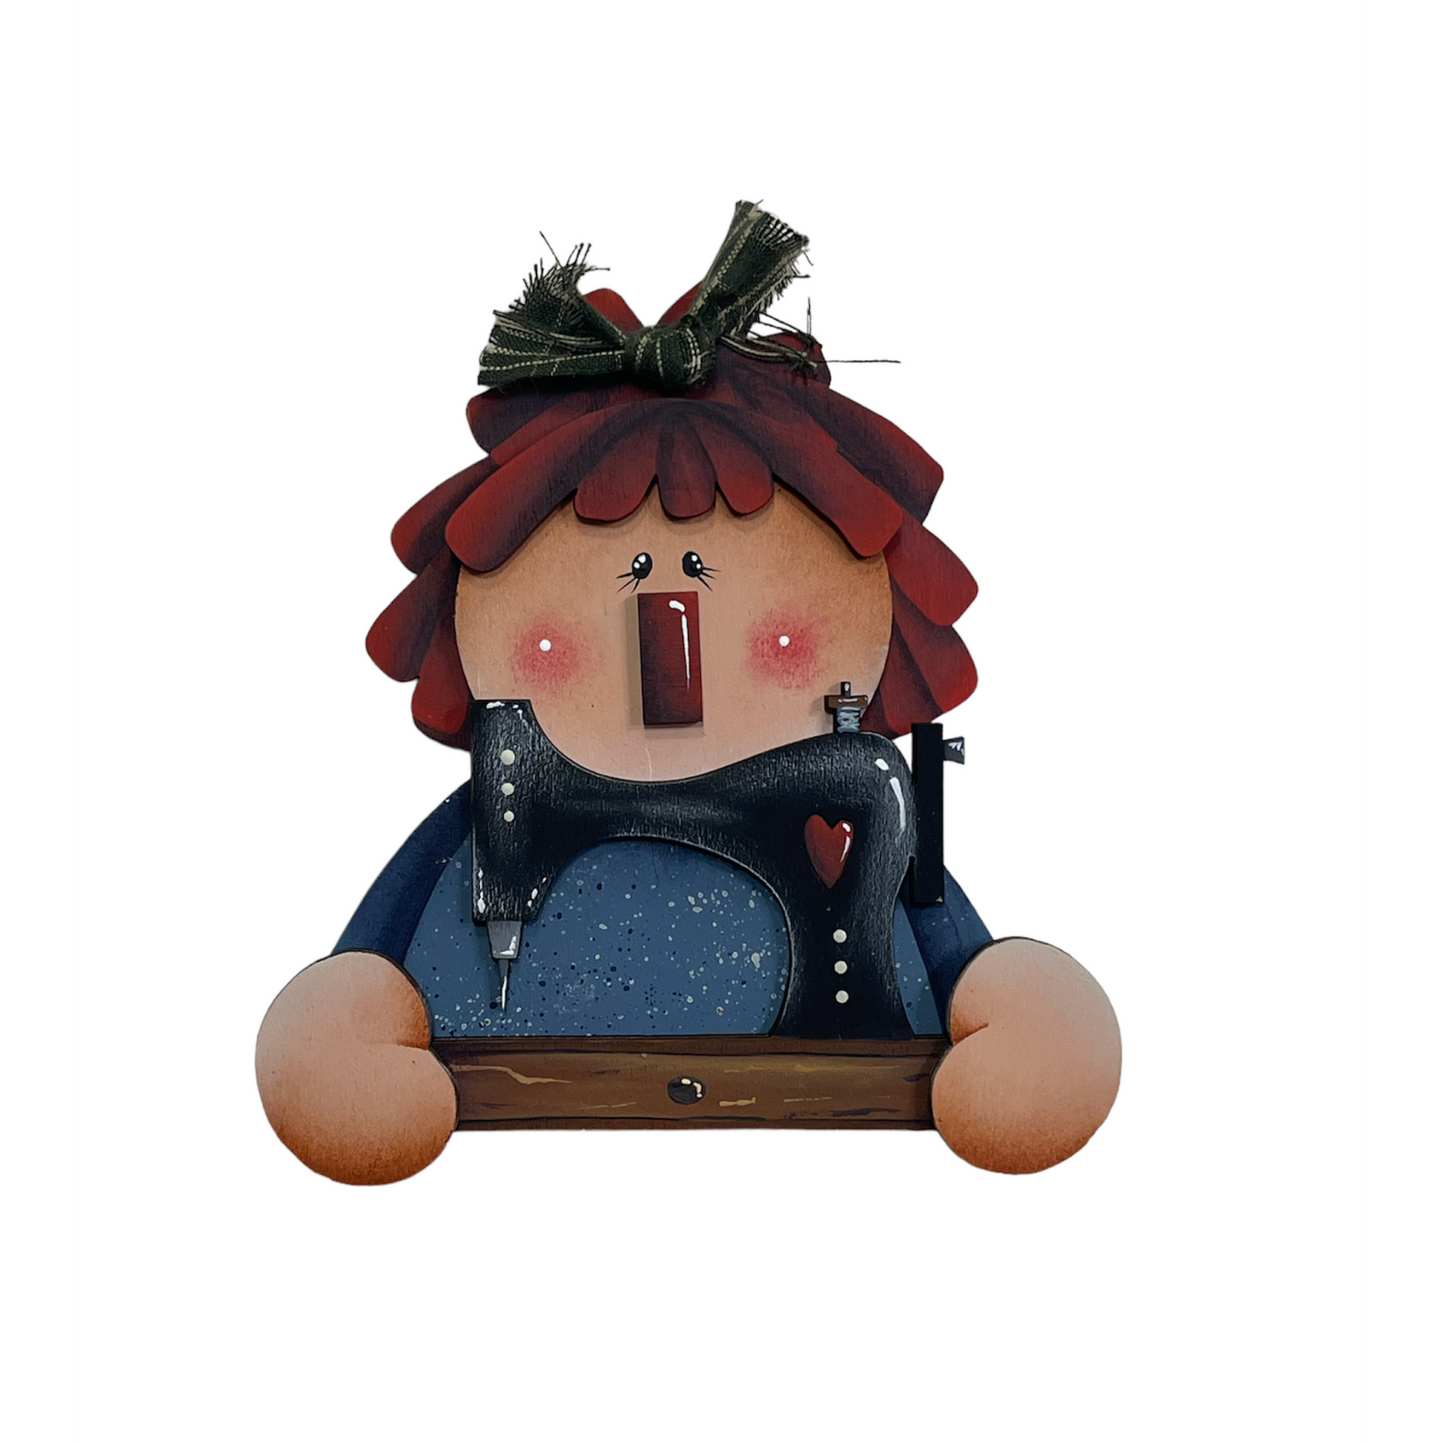 Raggedy ann ornament Out of the Wood